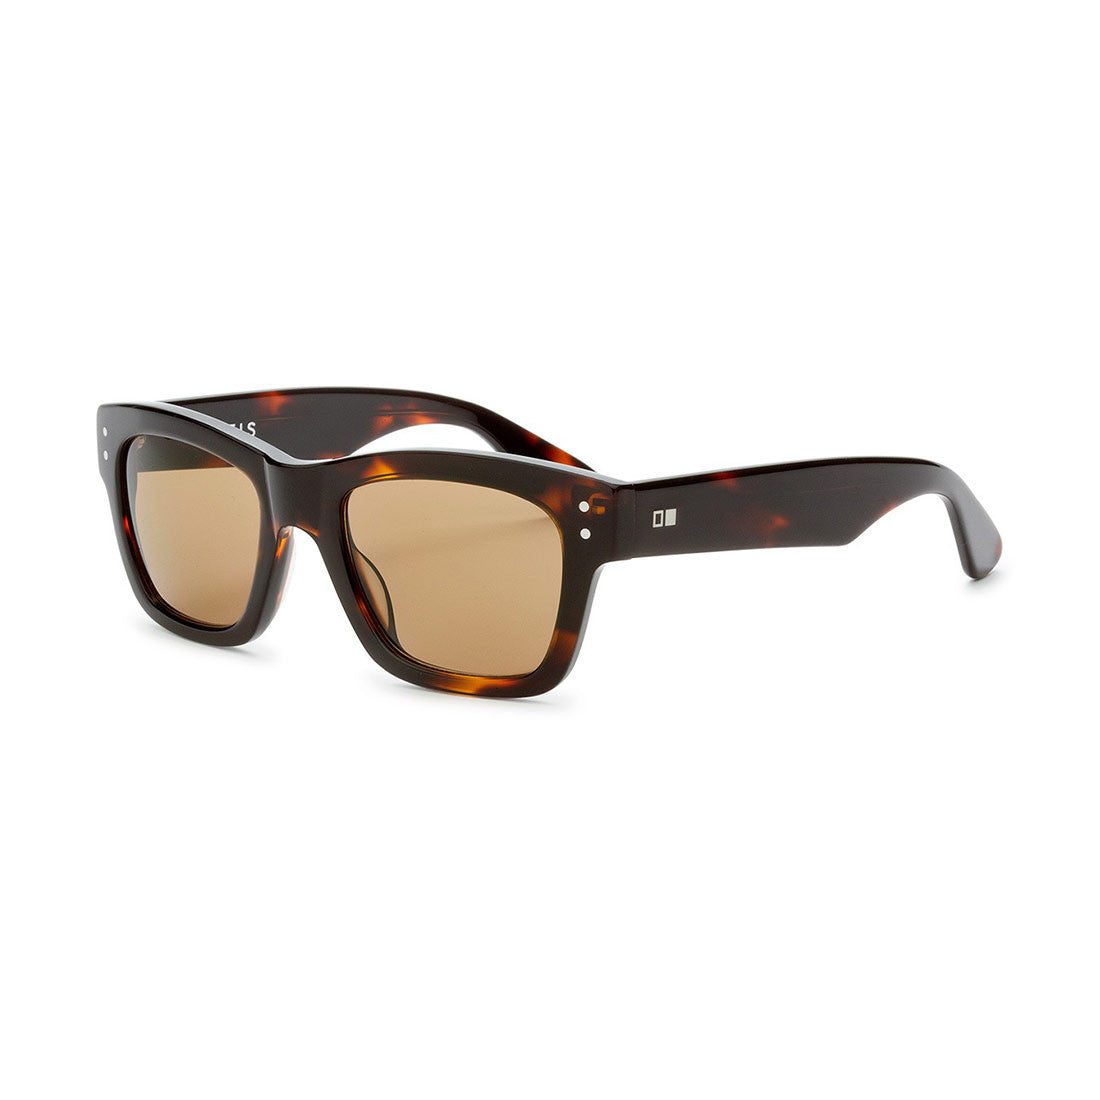 Otis Missing Pieces Sunglasses (Coffee/Tropical Brown)